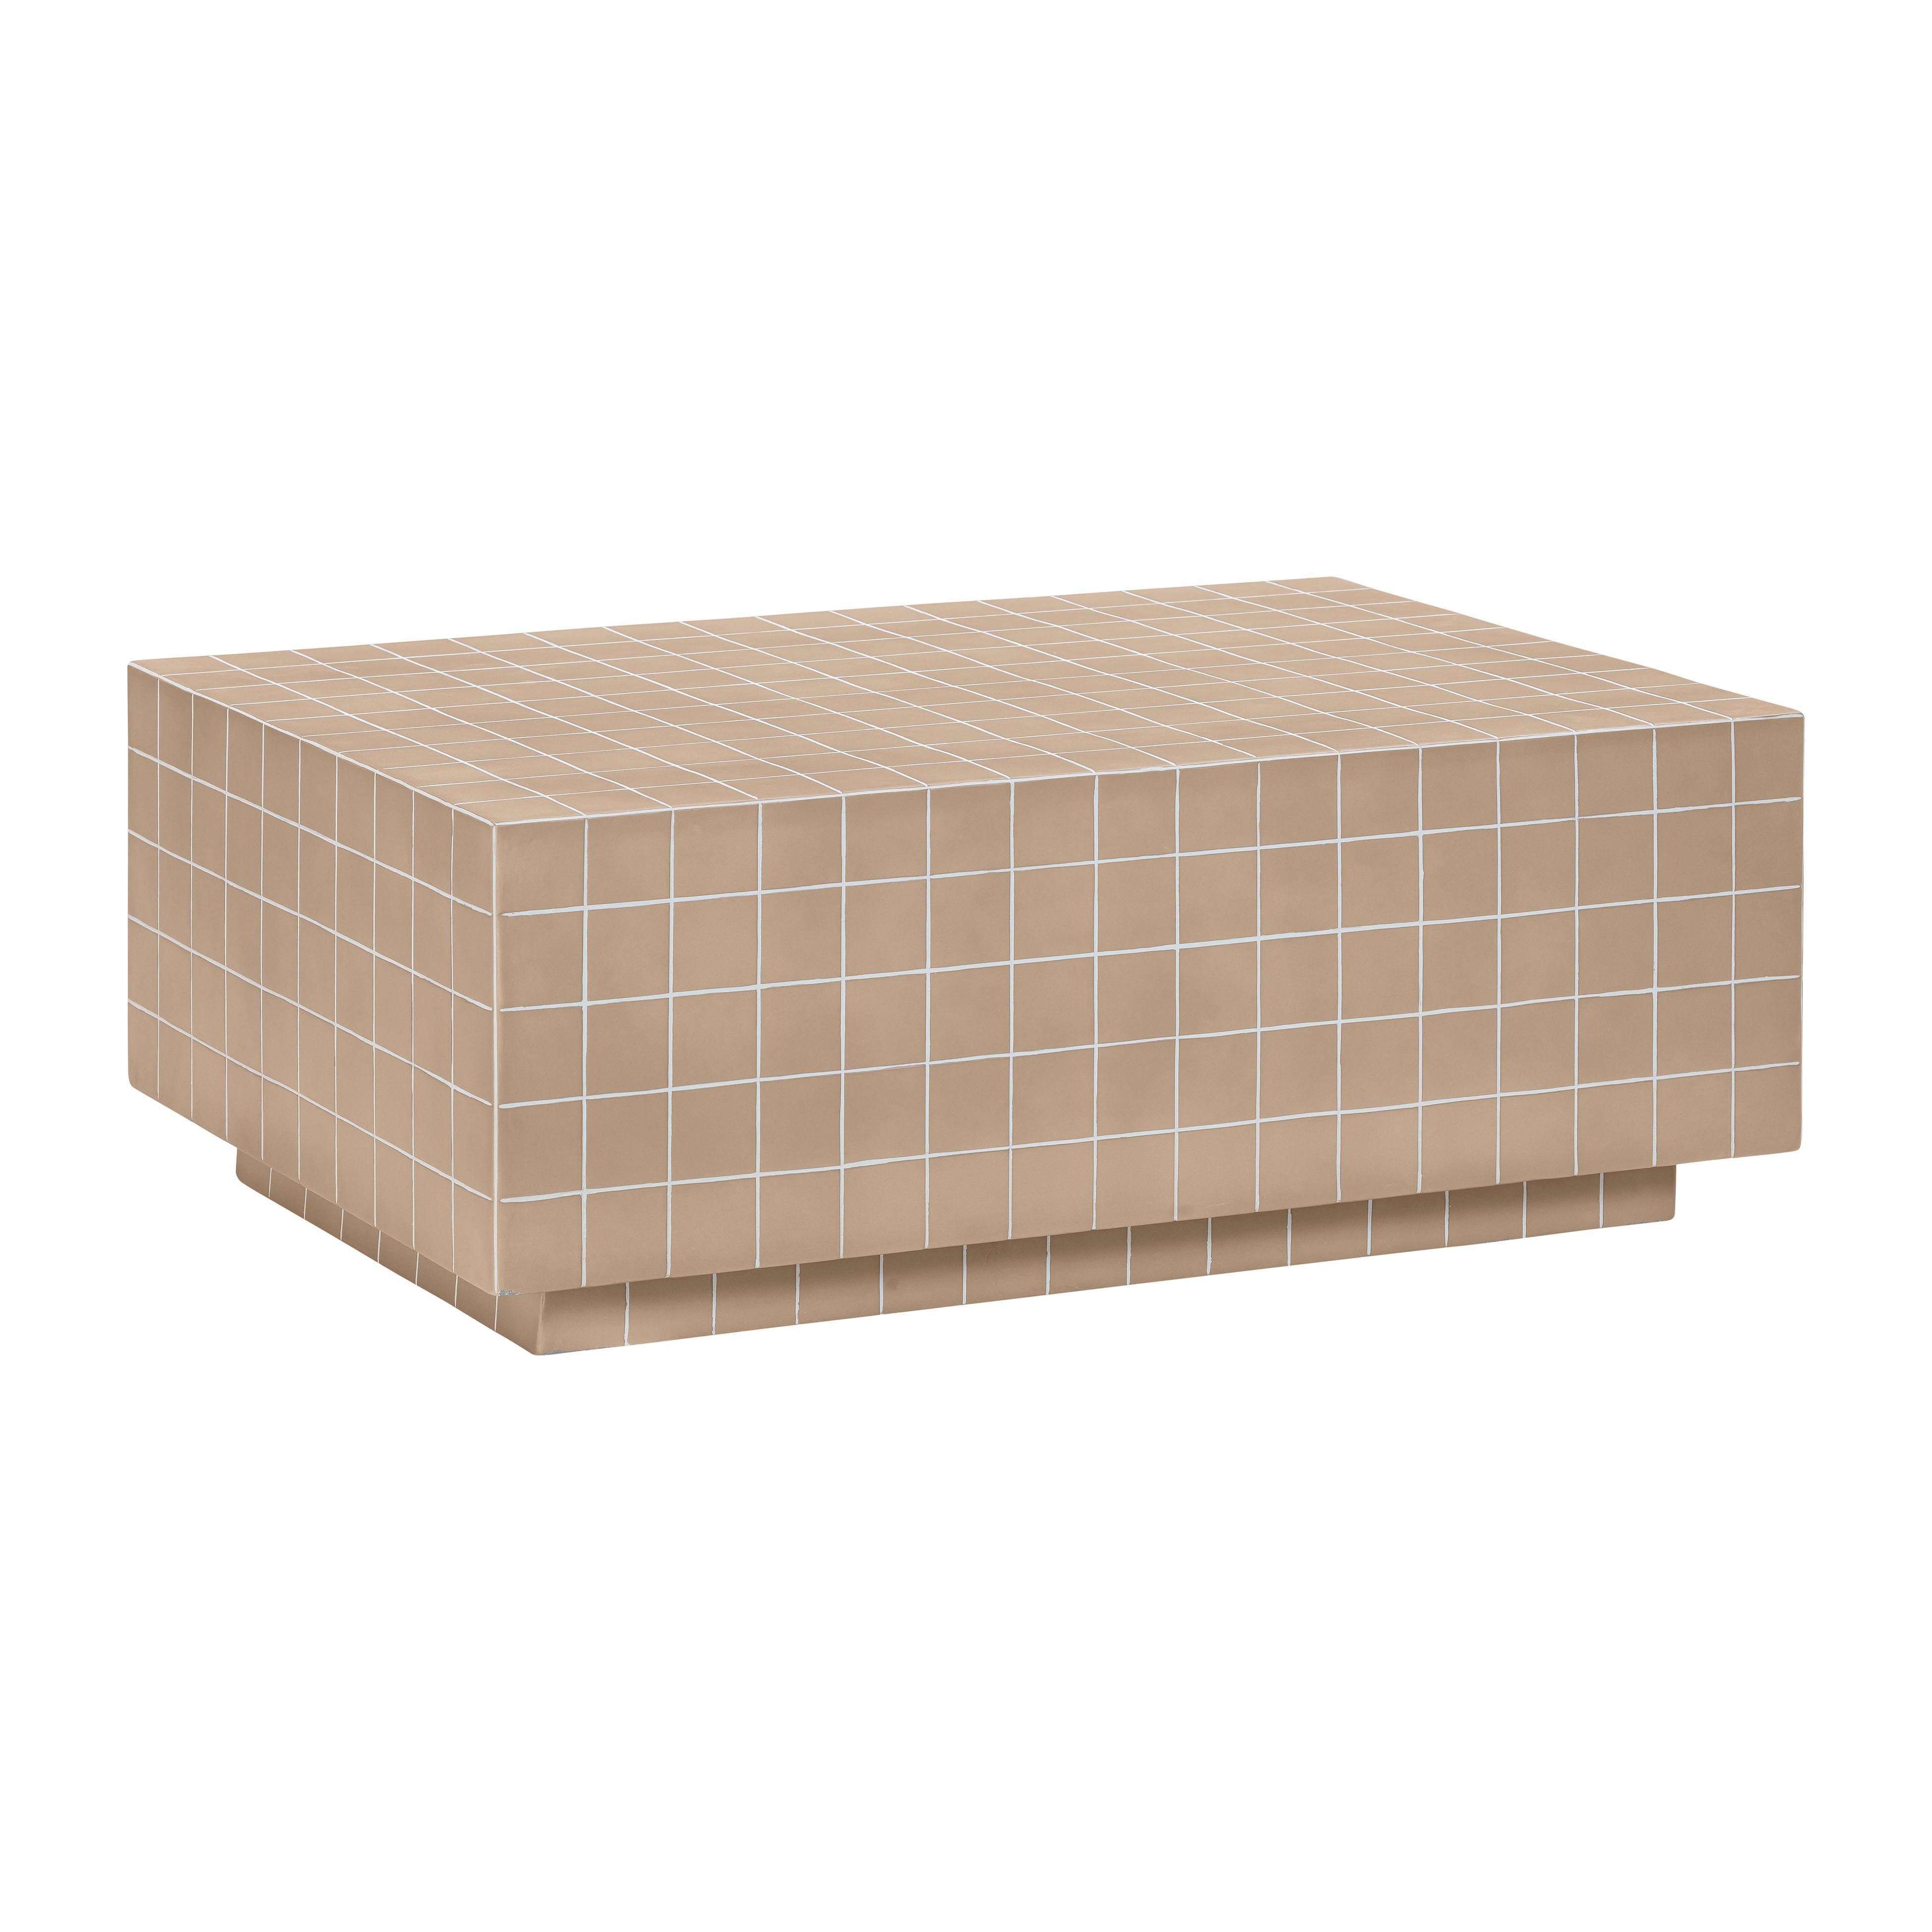 Mixie Tile Indoor / Outdoor Coffee Table